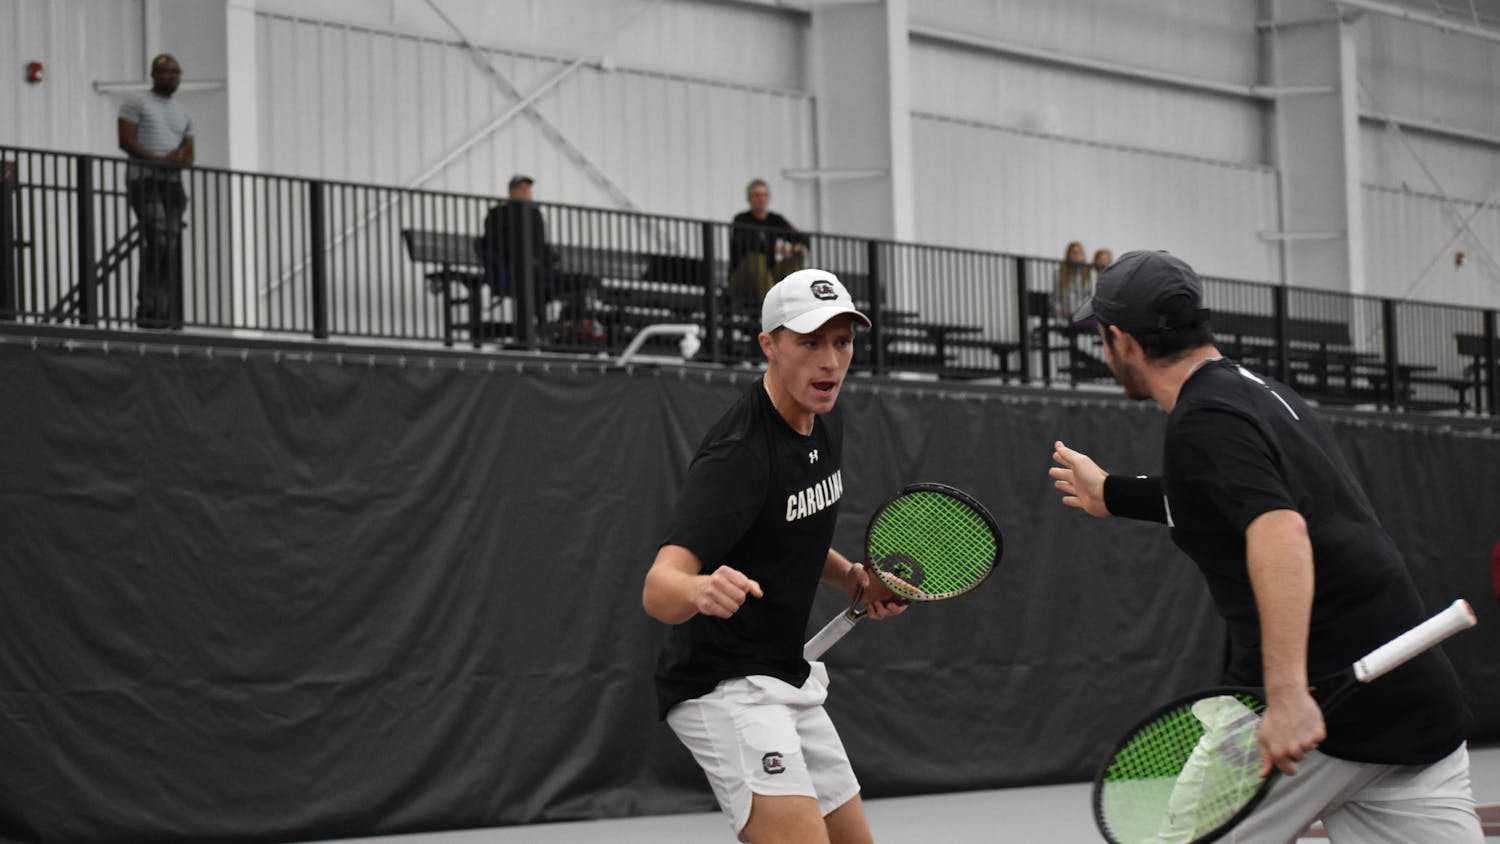 Junior James Story and graduate Jake Beasley celebrate after winning a point in their doubles match on day two of the ITA Kickoff Weekend event at the Carolina Indoor Tennis Center on Jan. 29, 2023. South Carolina beat N.C. State 4-0, making it the winner of the ITA tournament.&nbsp;